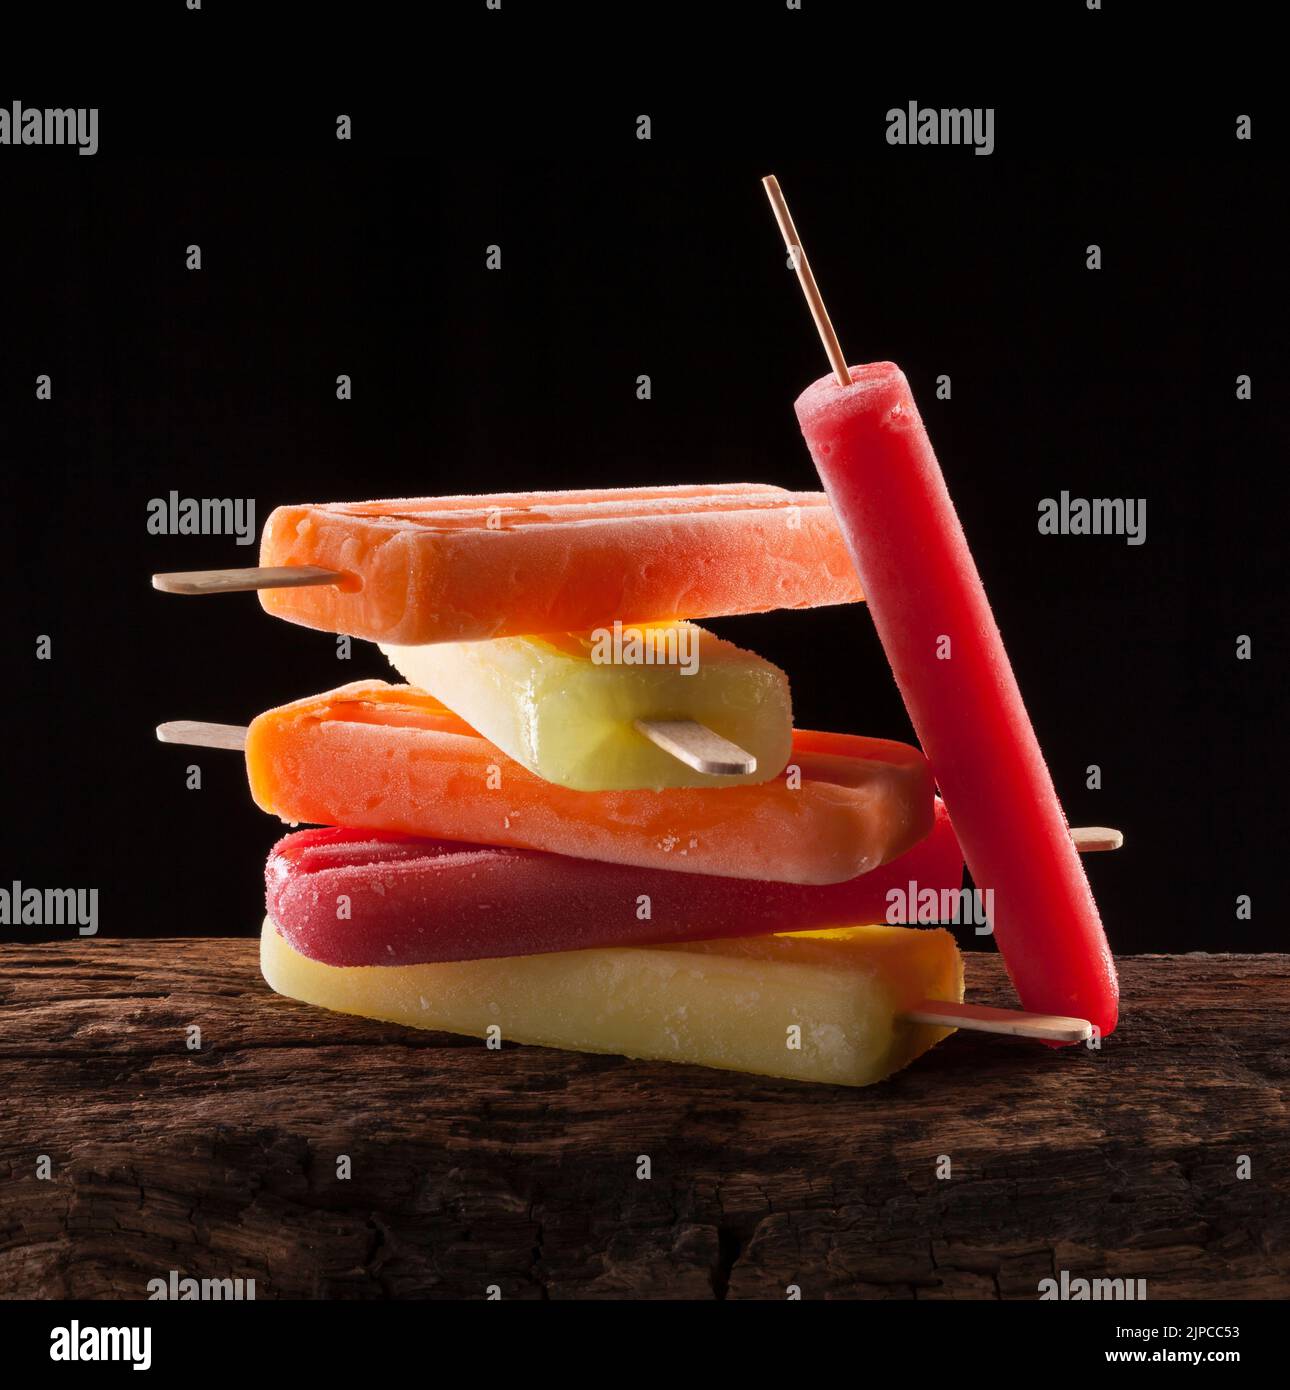 A pile of ice lollies of different flavors on a wooden surface. Stock Photo